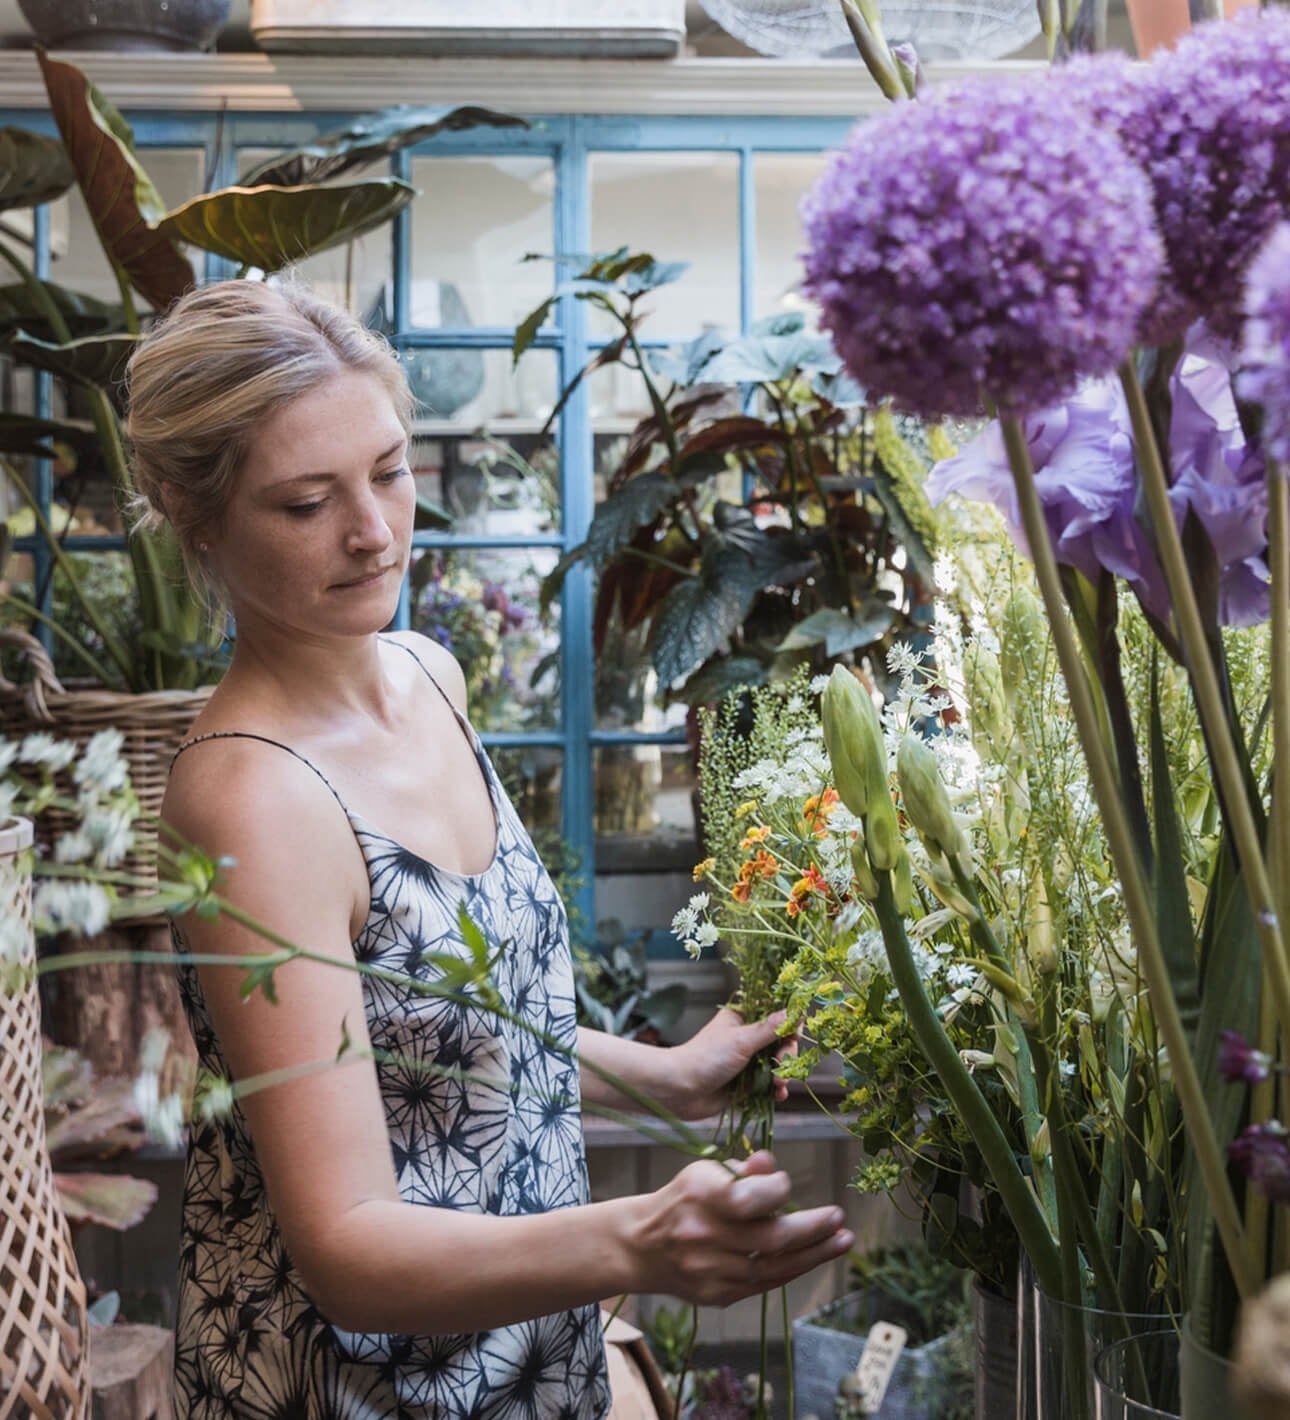 A woman works in her local flower shop